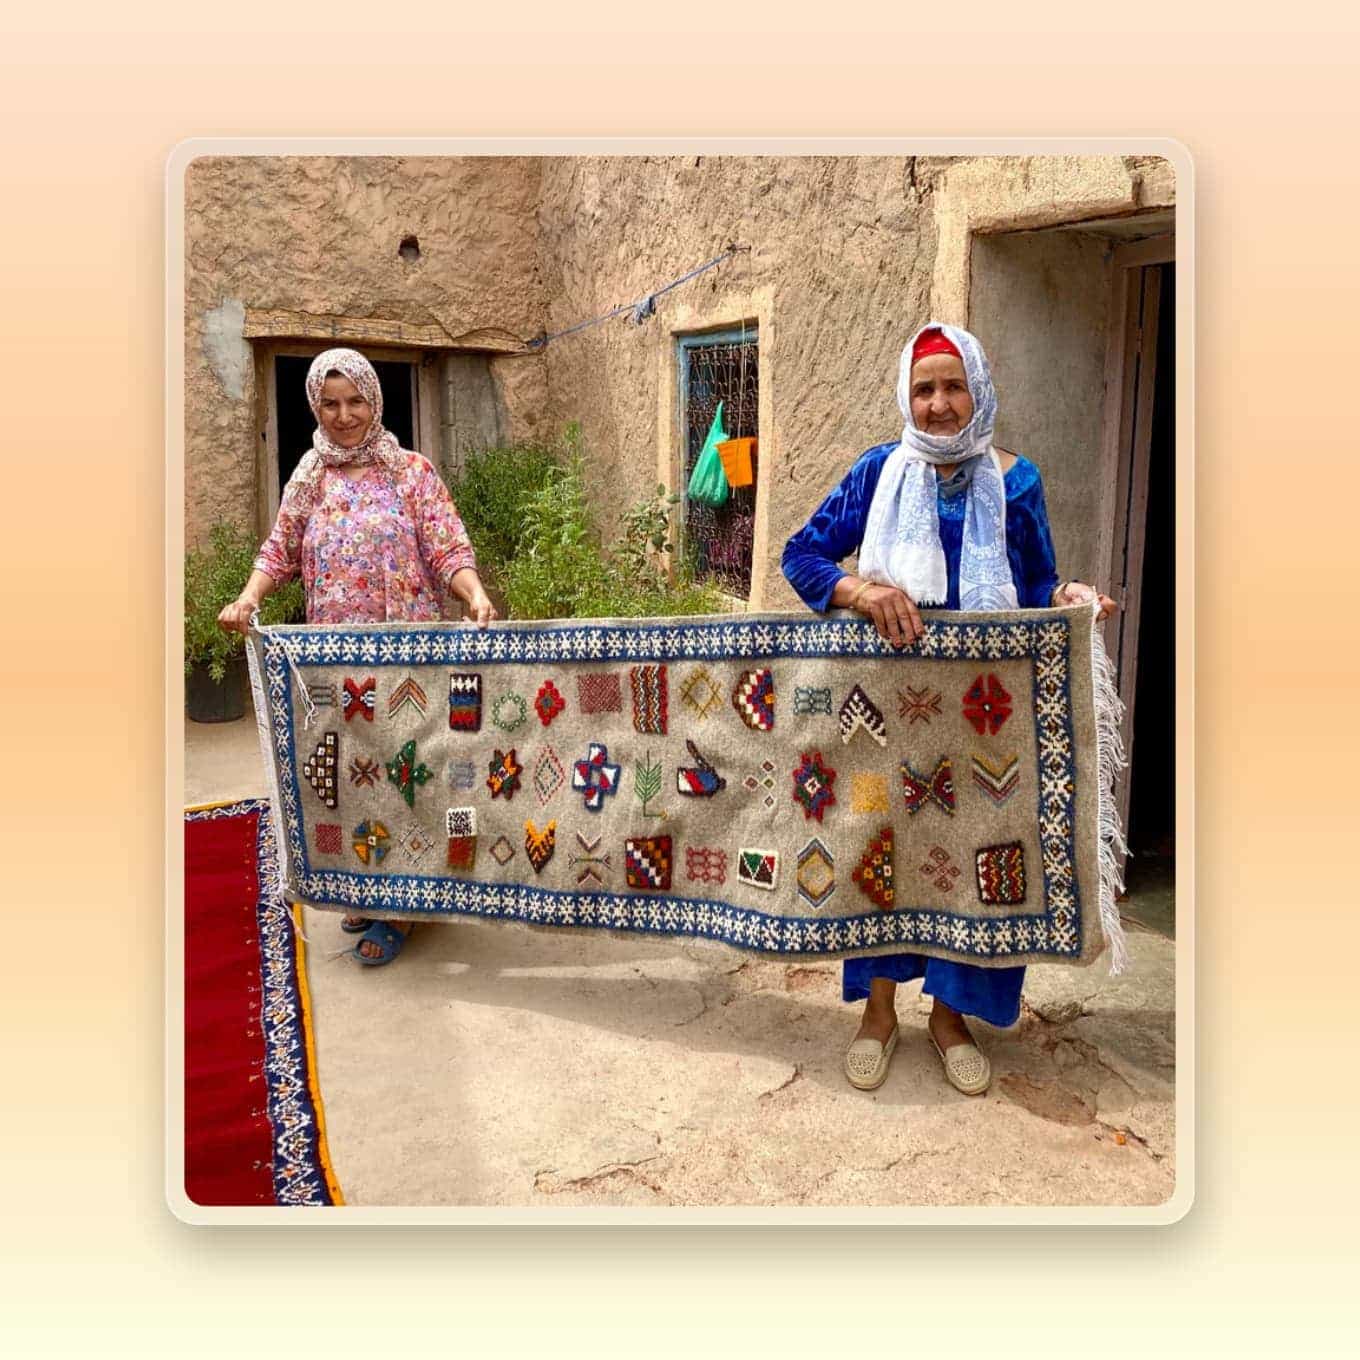 Two artisans hold an ethically made rug